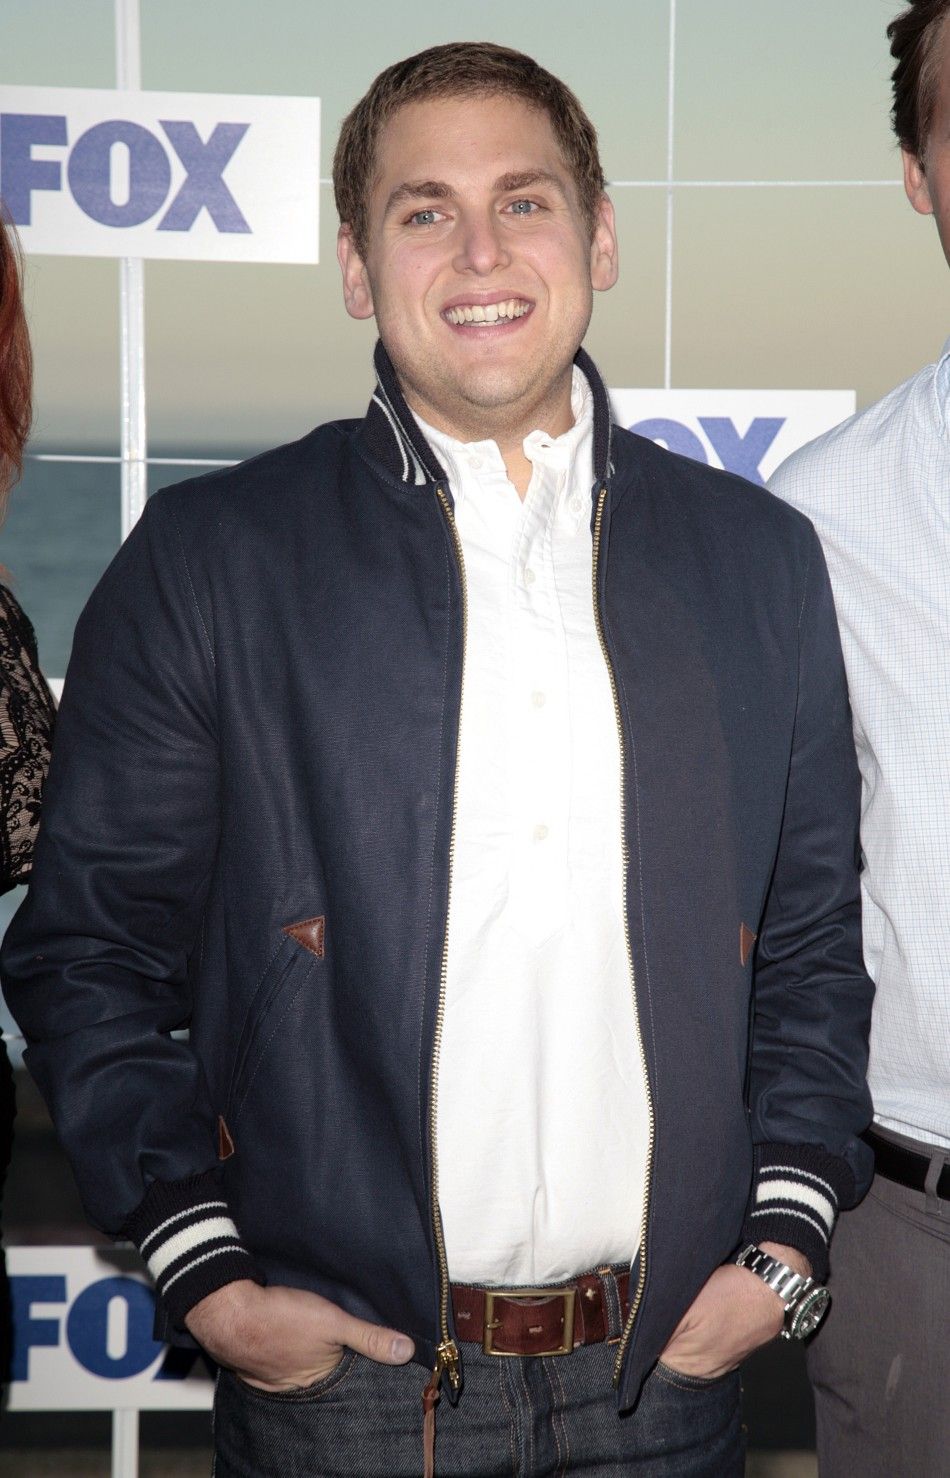 Actor Jonah Hill arrives at the Fox All-Star Party in Pacific Palisades, California